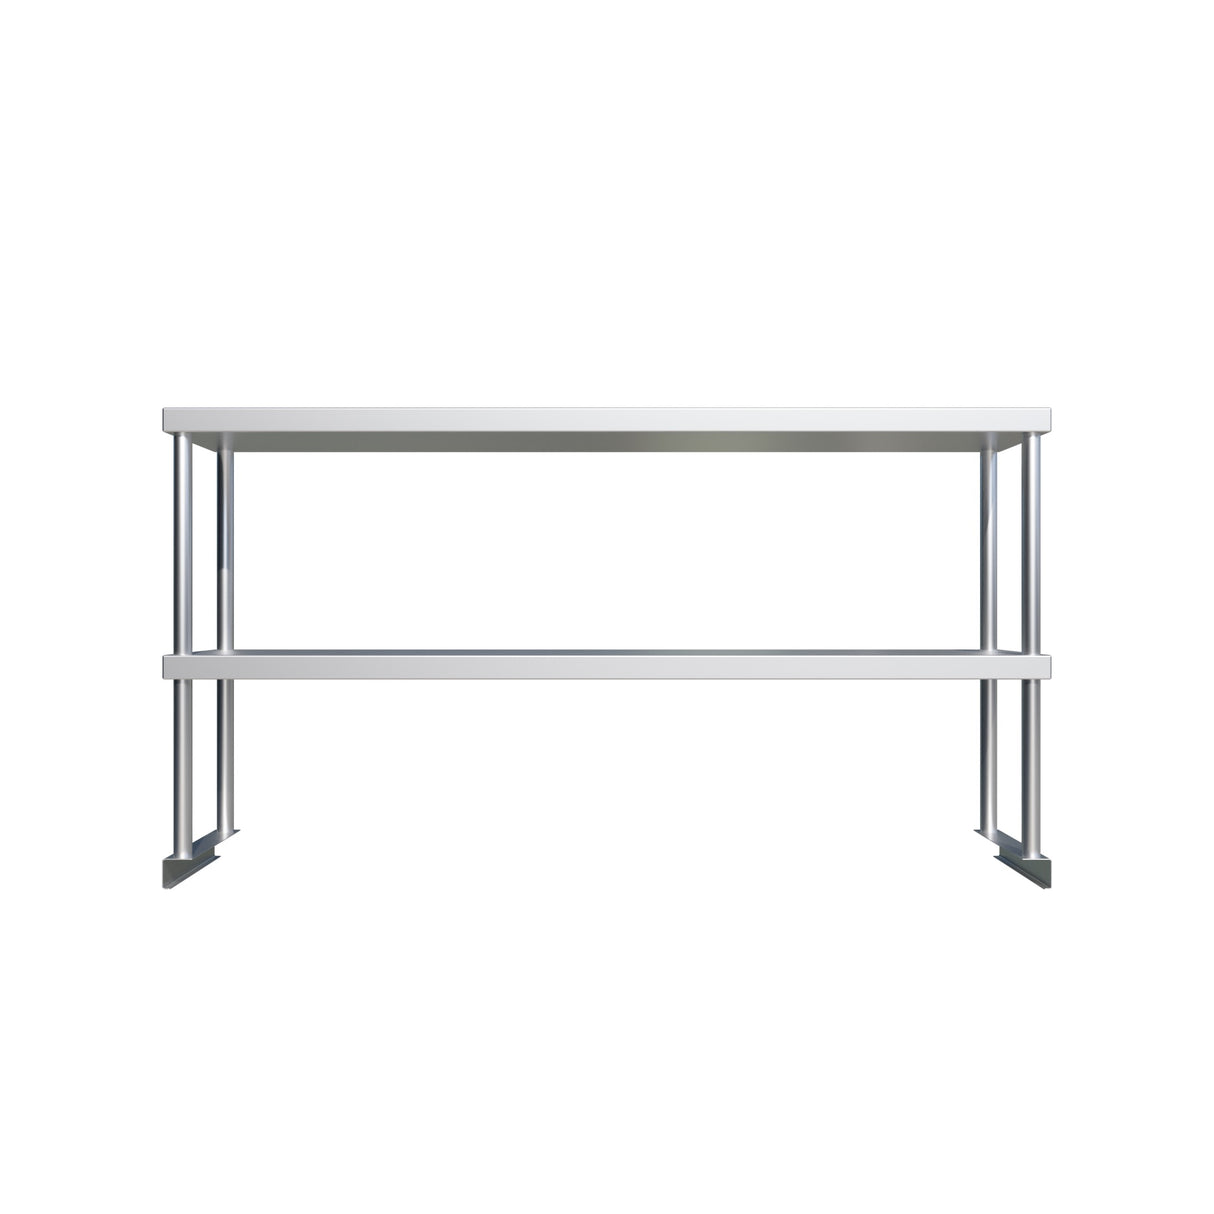 Empire Stainless Steel Double Over Shelf 1200mm Wide - OSD-1248 Stainless Steel Over Shelves Empire   